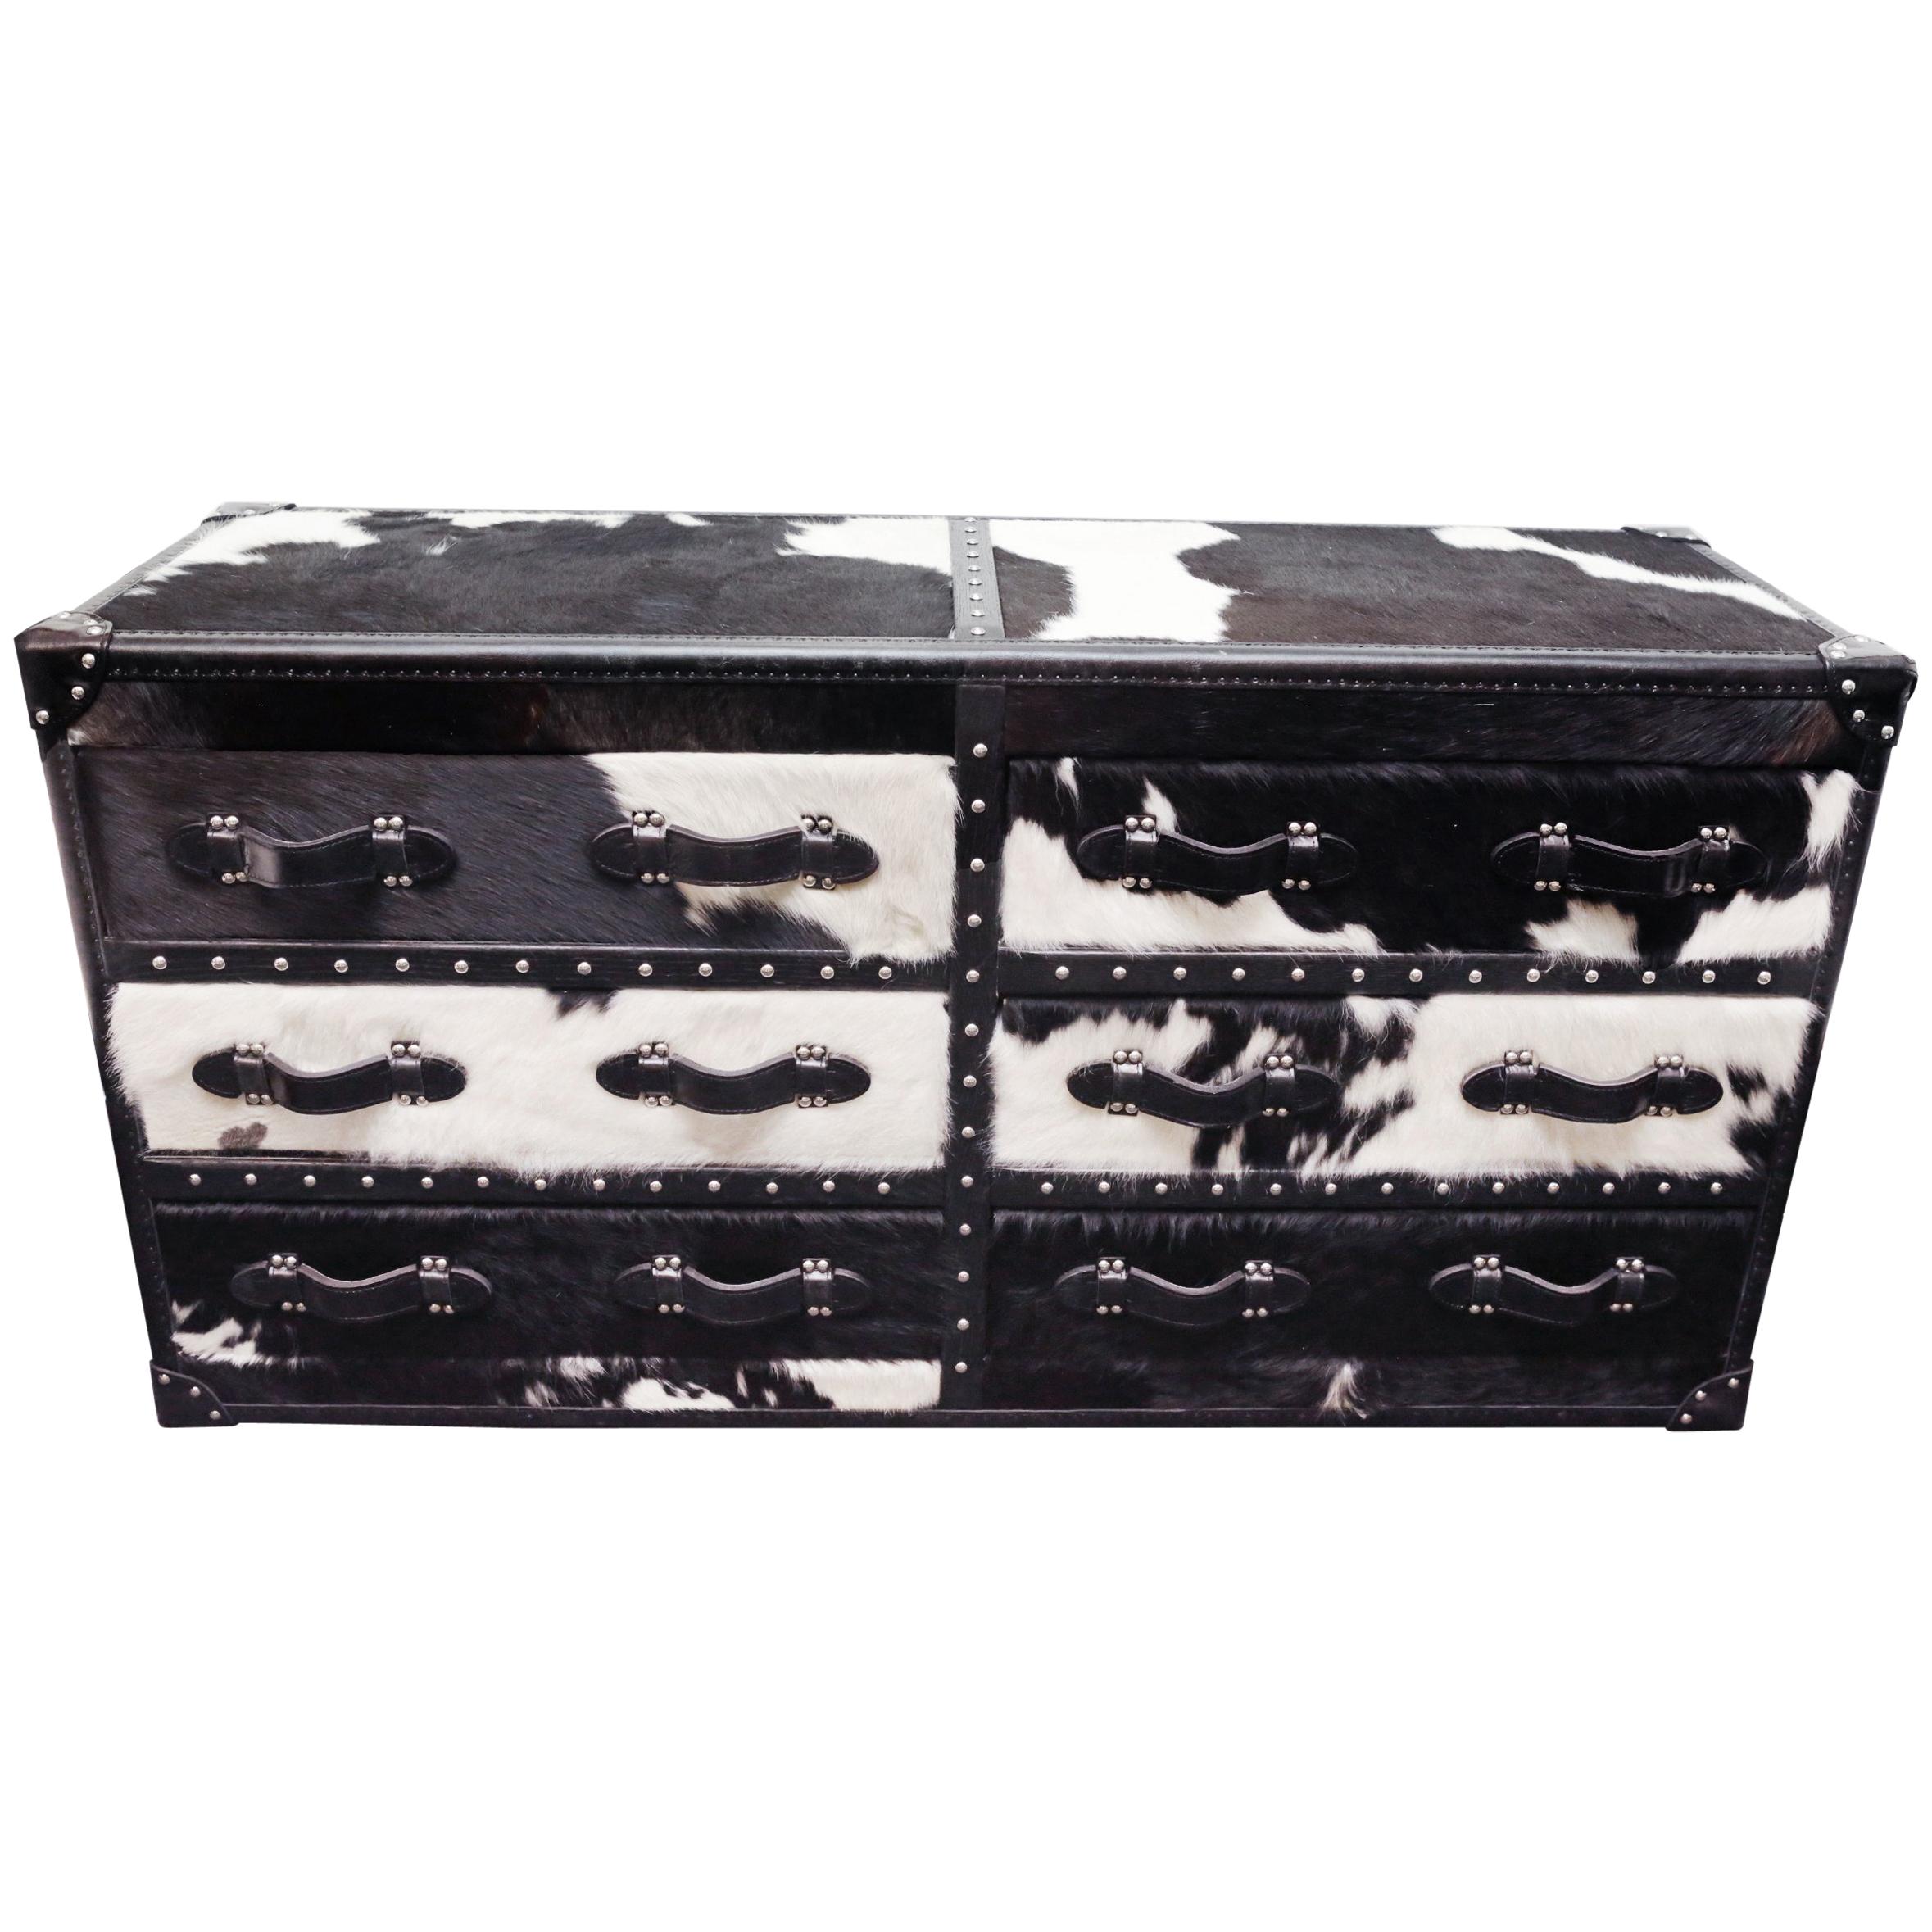 Wild Black and White Cowhide Long Chest For Sale